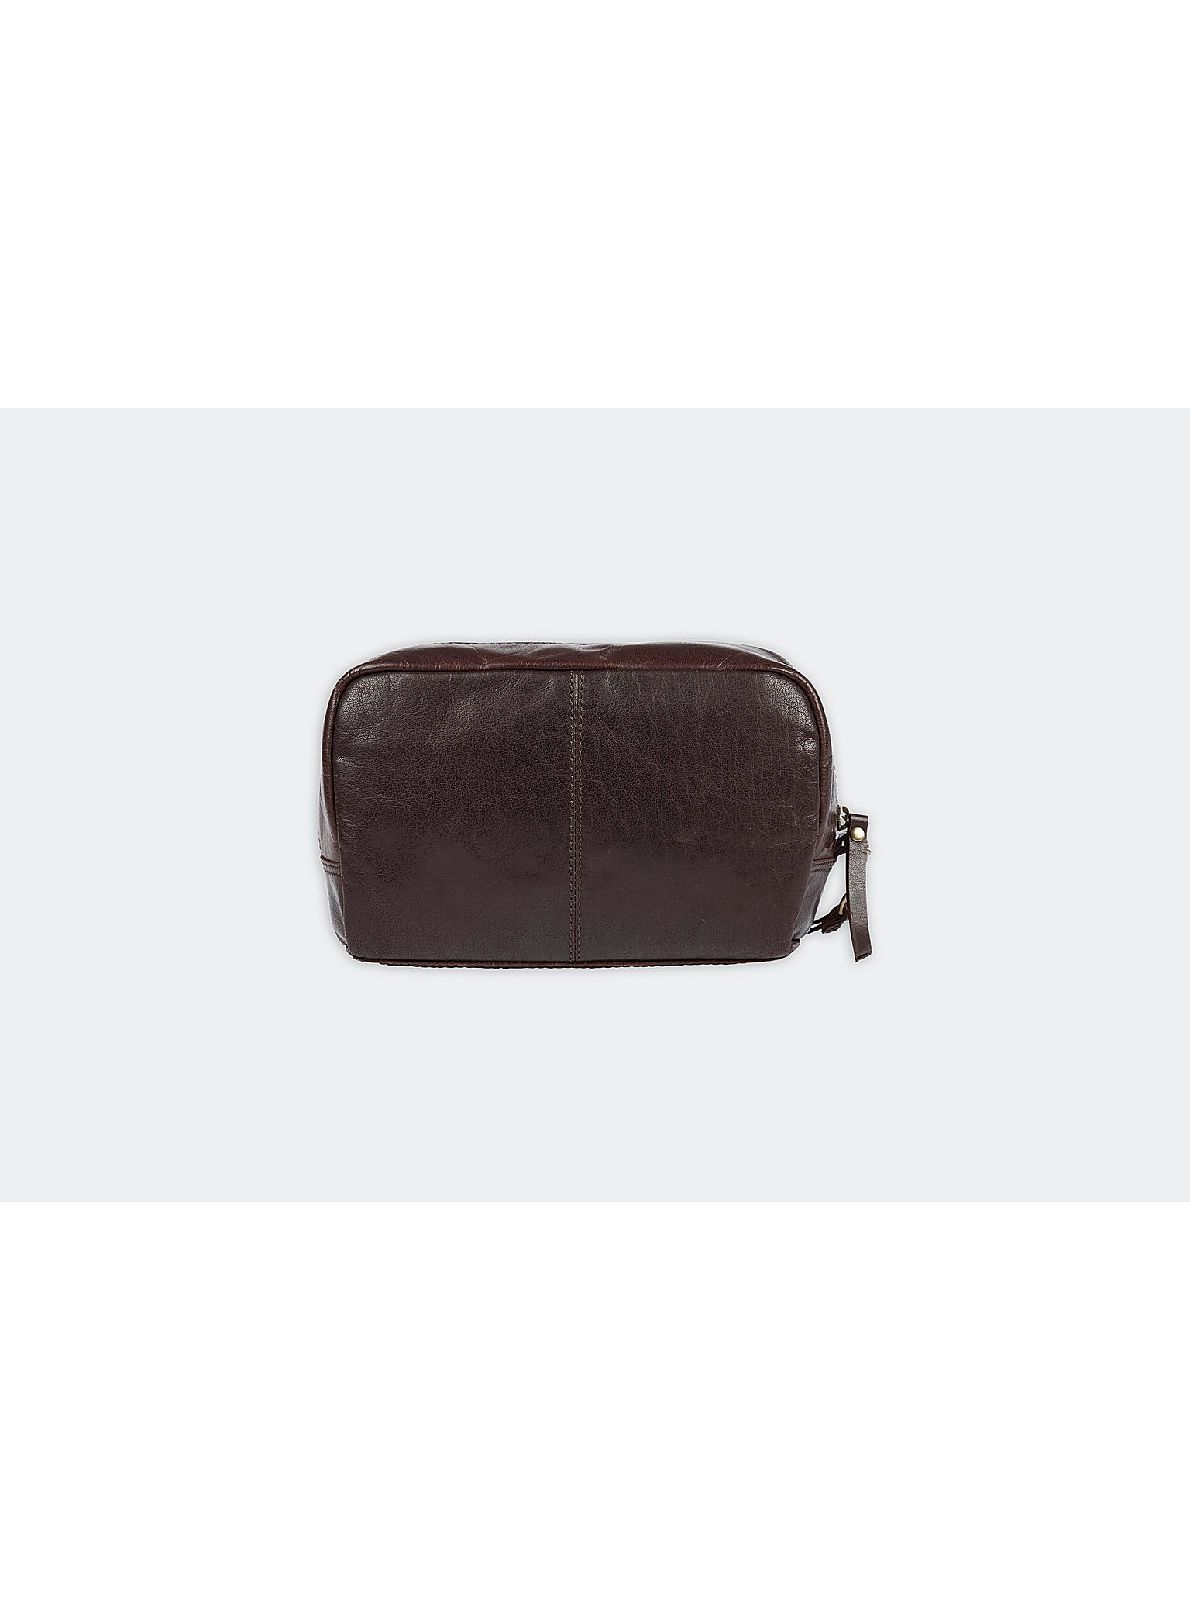 Arsenal Heritage Leather Toiletries Bag | Official Online Store